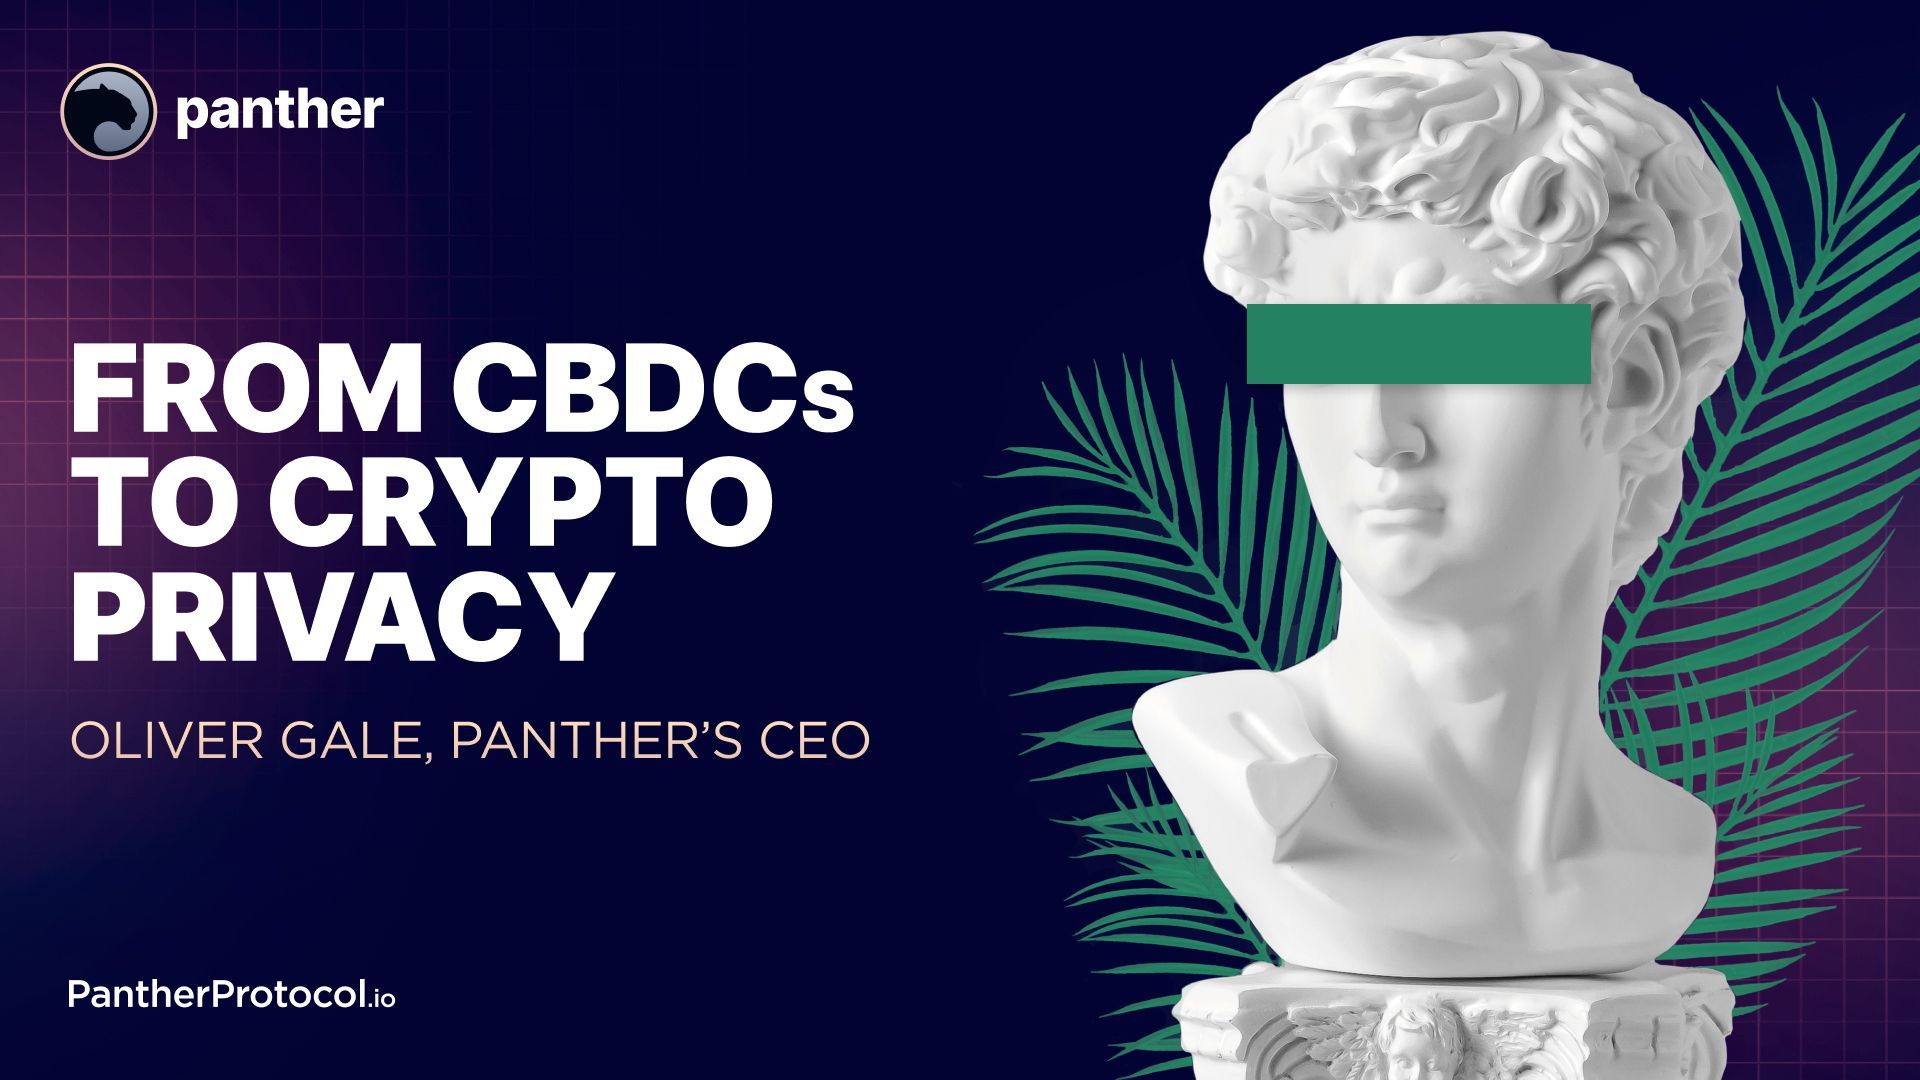 From CBDCs to crypto privacy: Oliver Gale, Panther’s CEO